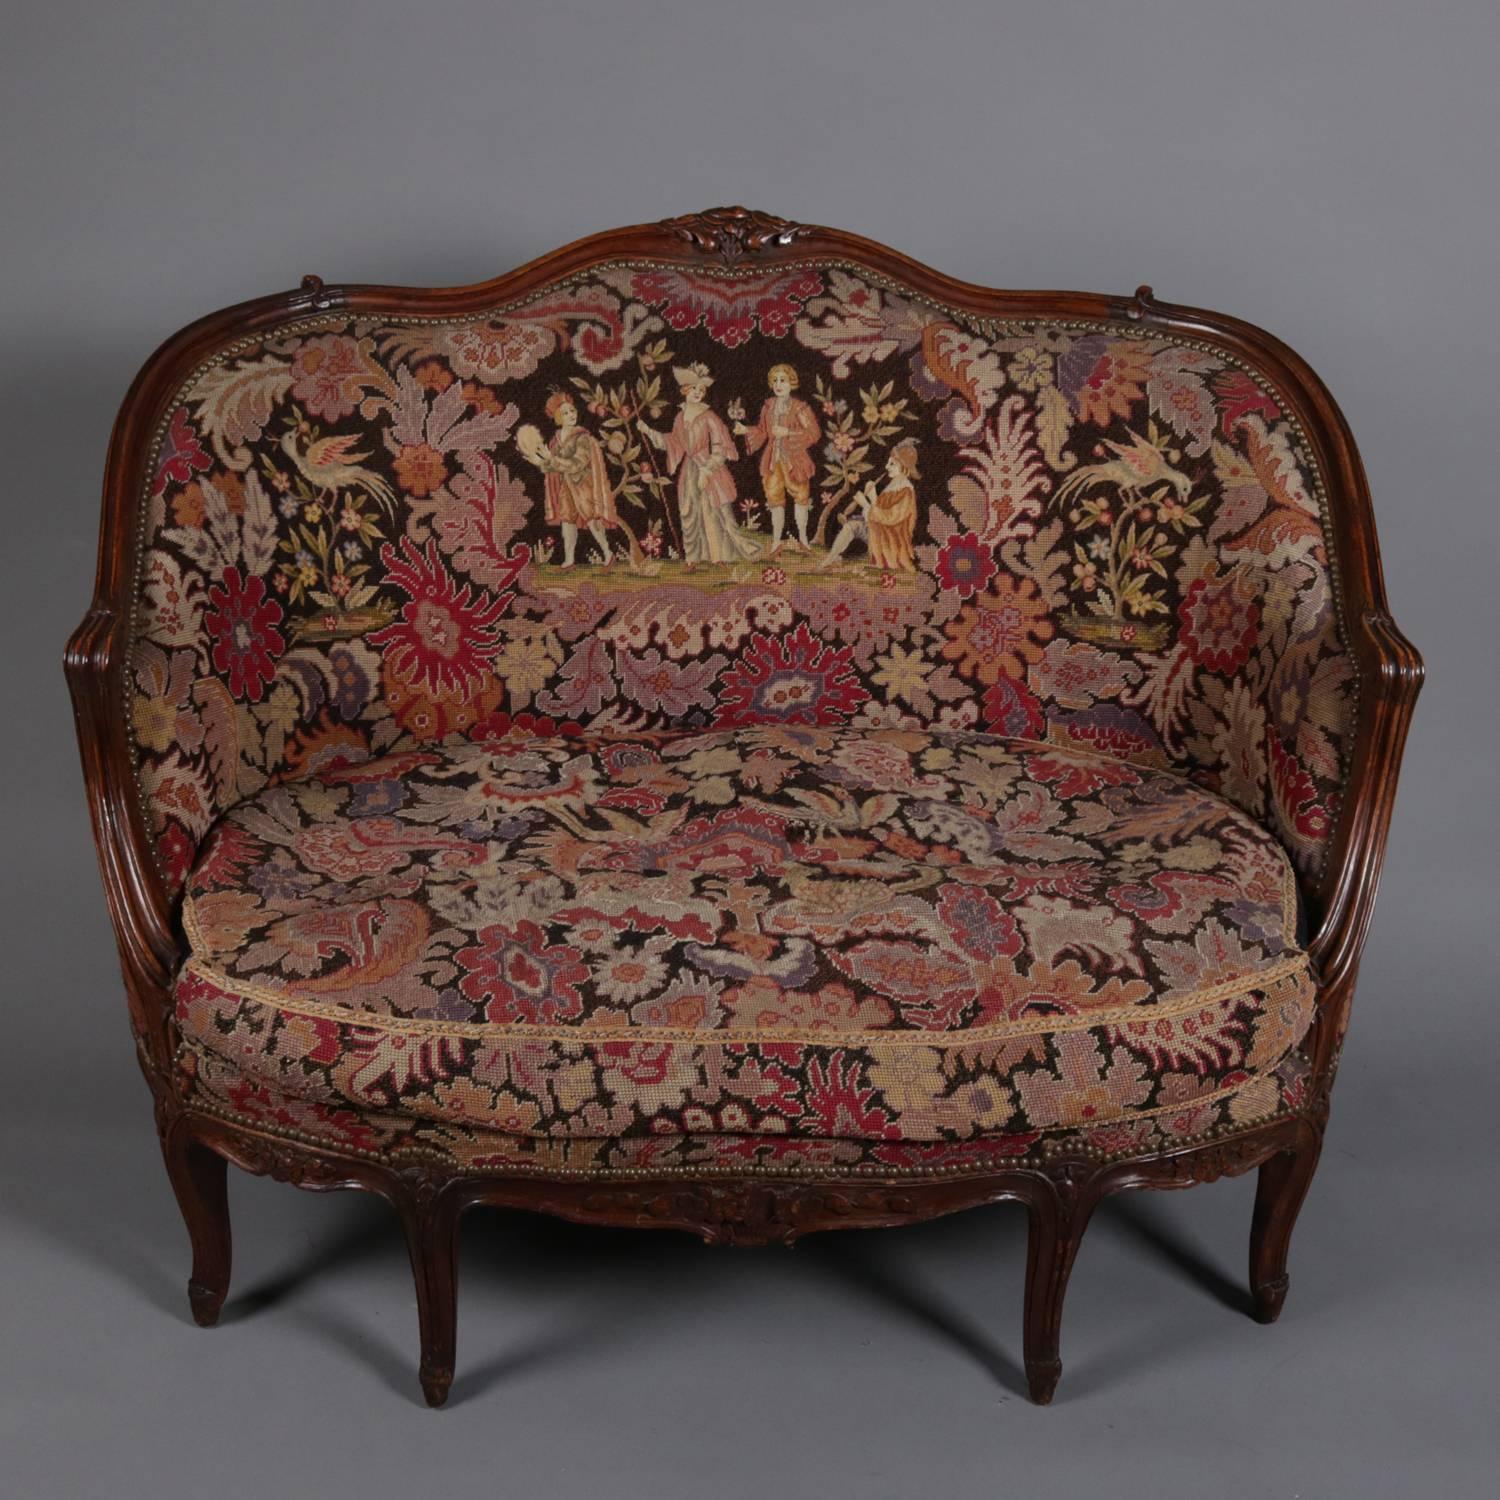 French Louis XV style settee features mahogany frame with carved foliate, floral and scroll decoration; upholstered in pictorial tapestry depicting courting scene in garden setting; 19th century.

Measures: 37